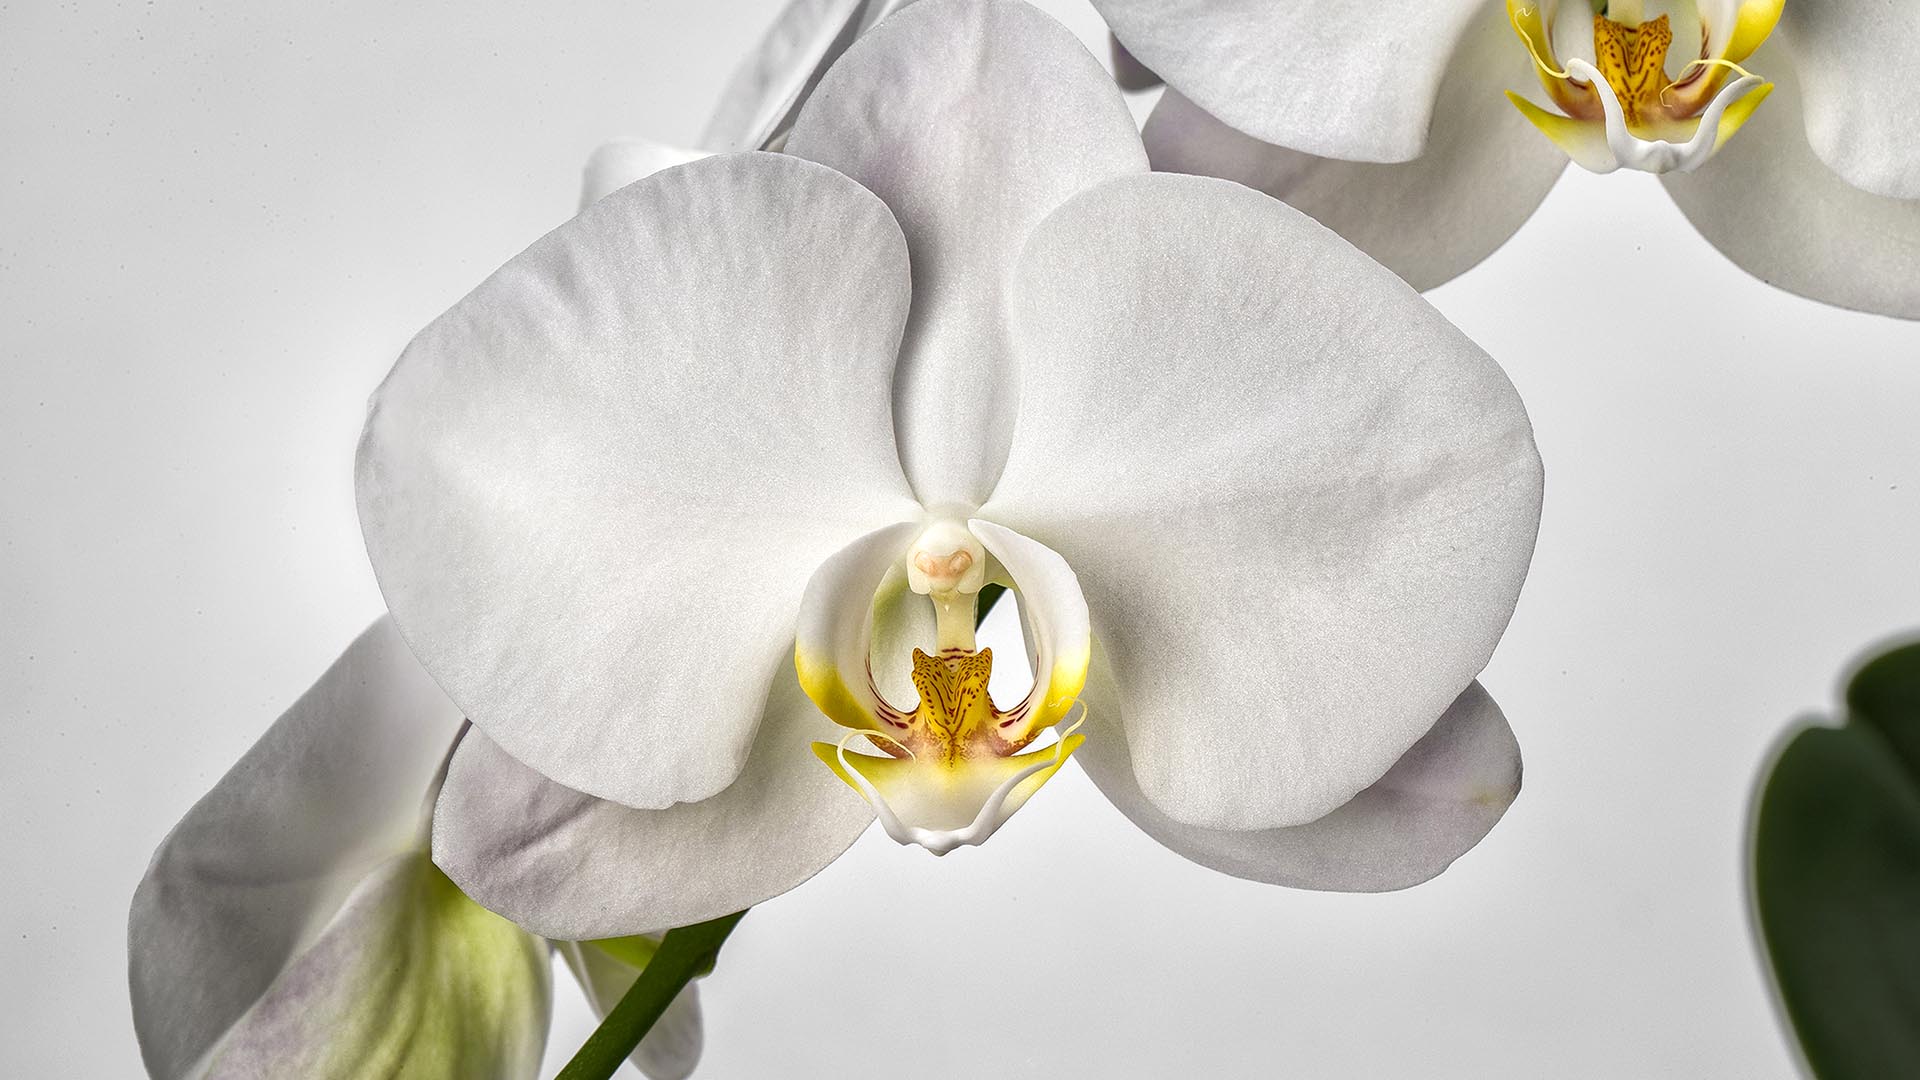 The white flower on an orchid.